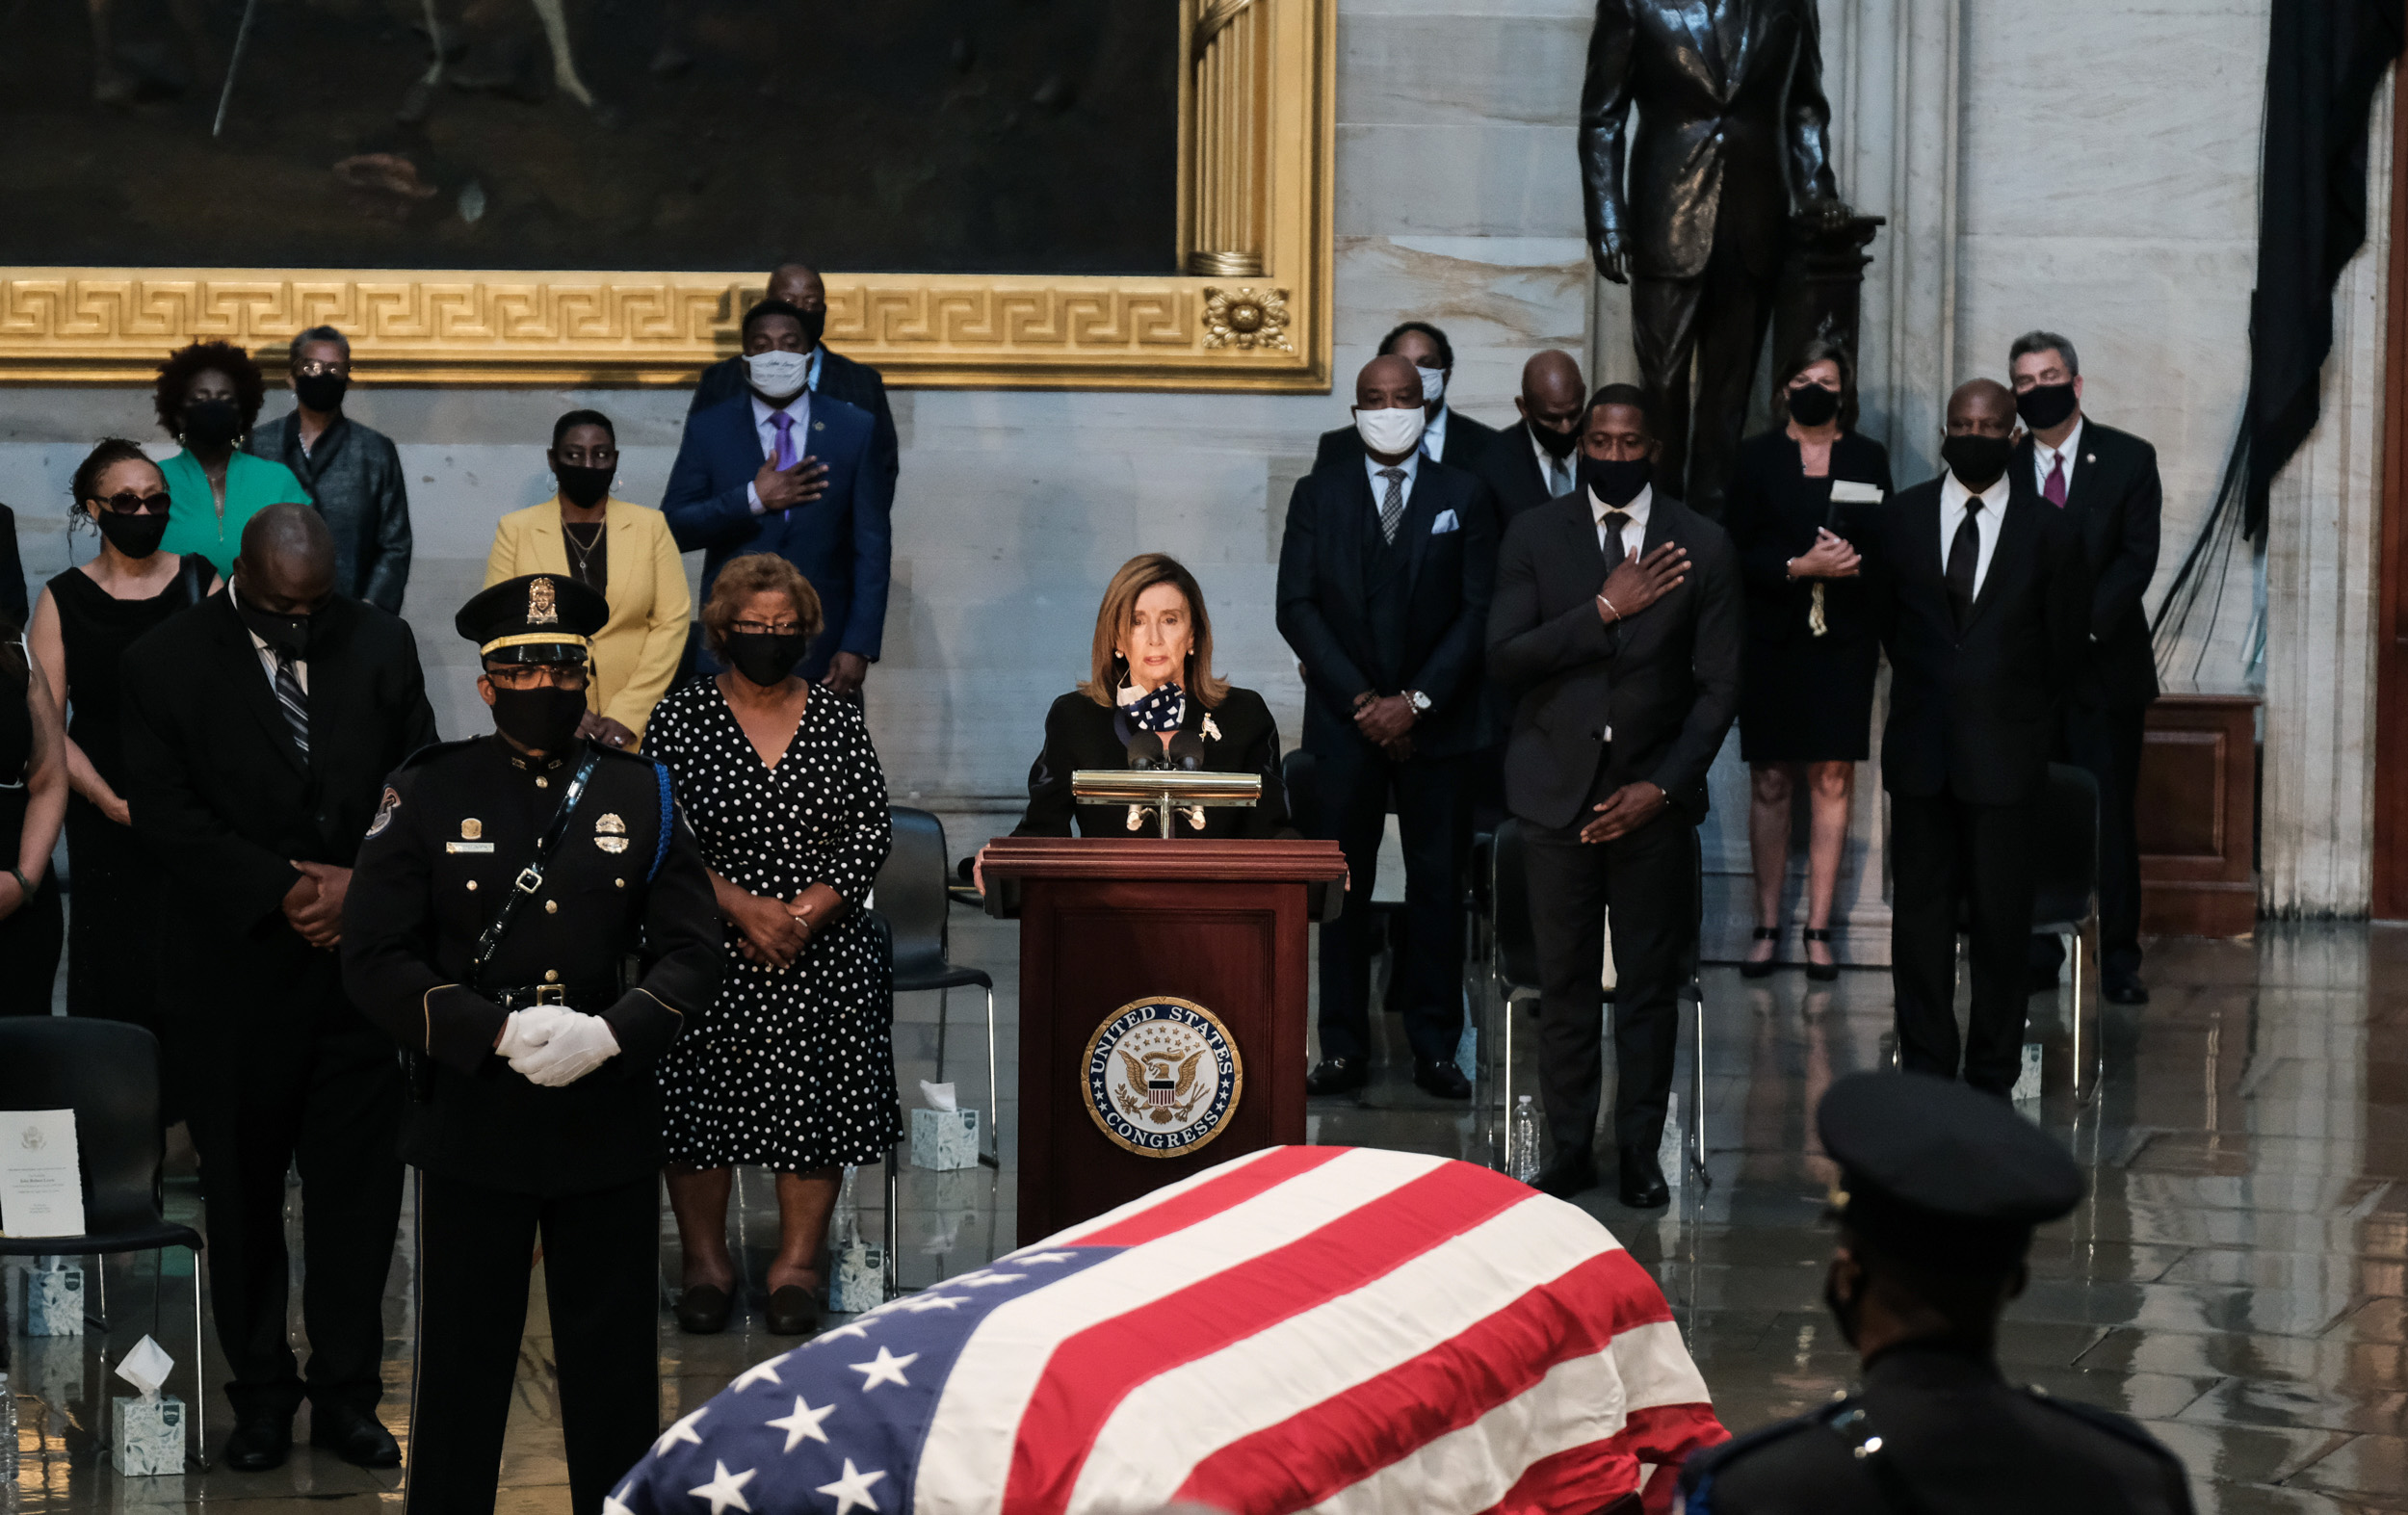 PHOTO: Speaker of the House Rep. Nancy Pelosi (D-CA) pays her respects as the  Rep. John Lewis (D-GA) lies in state at the Capitol Rotunda in Washington, D.C. July 27, 2020.